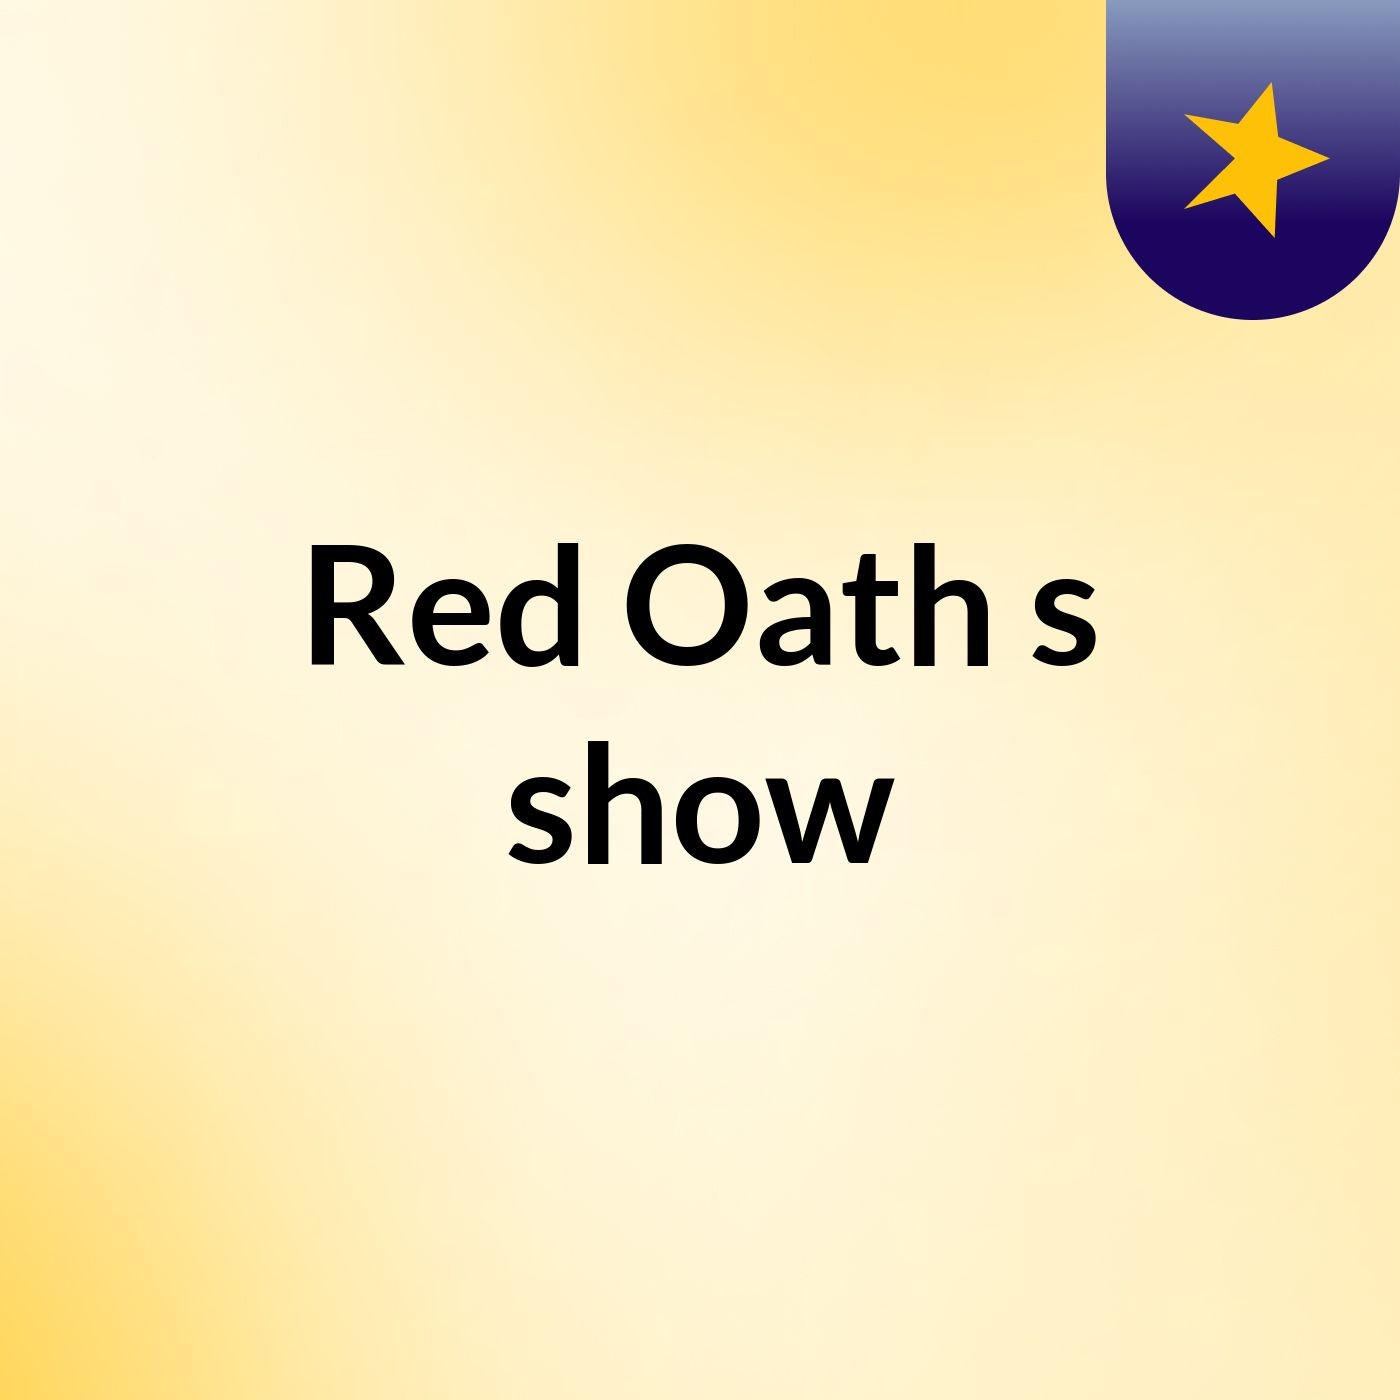 Red Oath's show